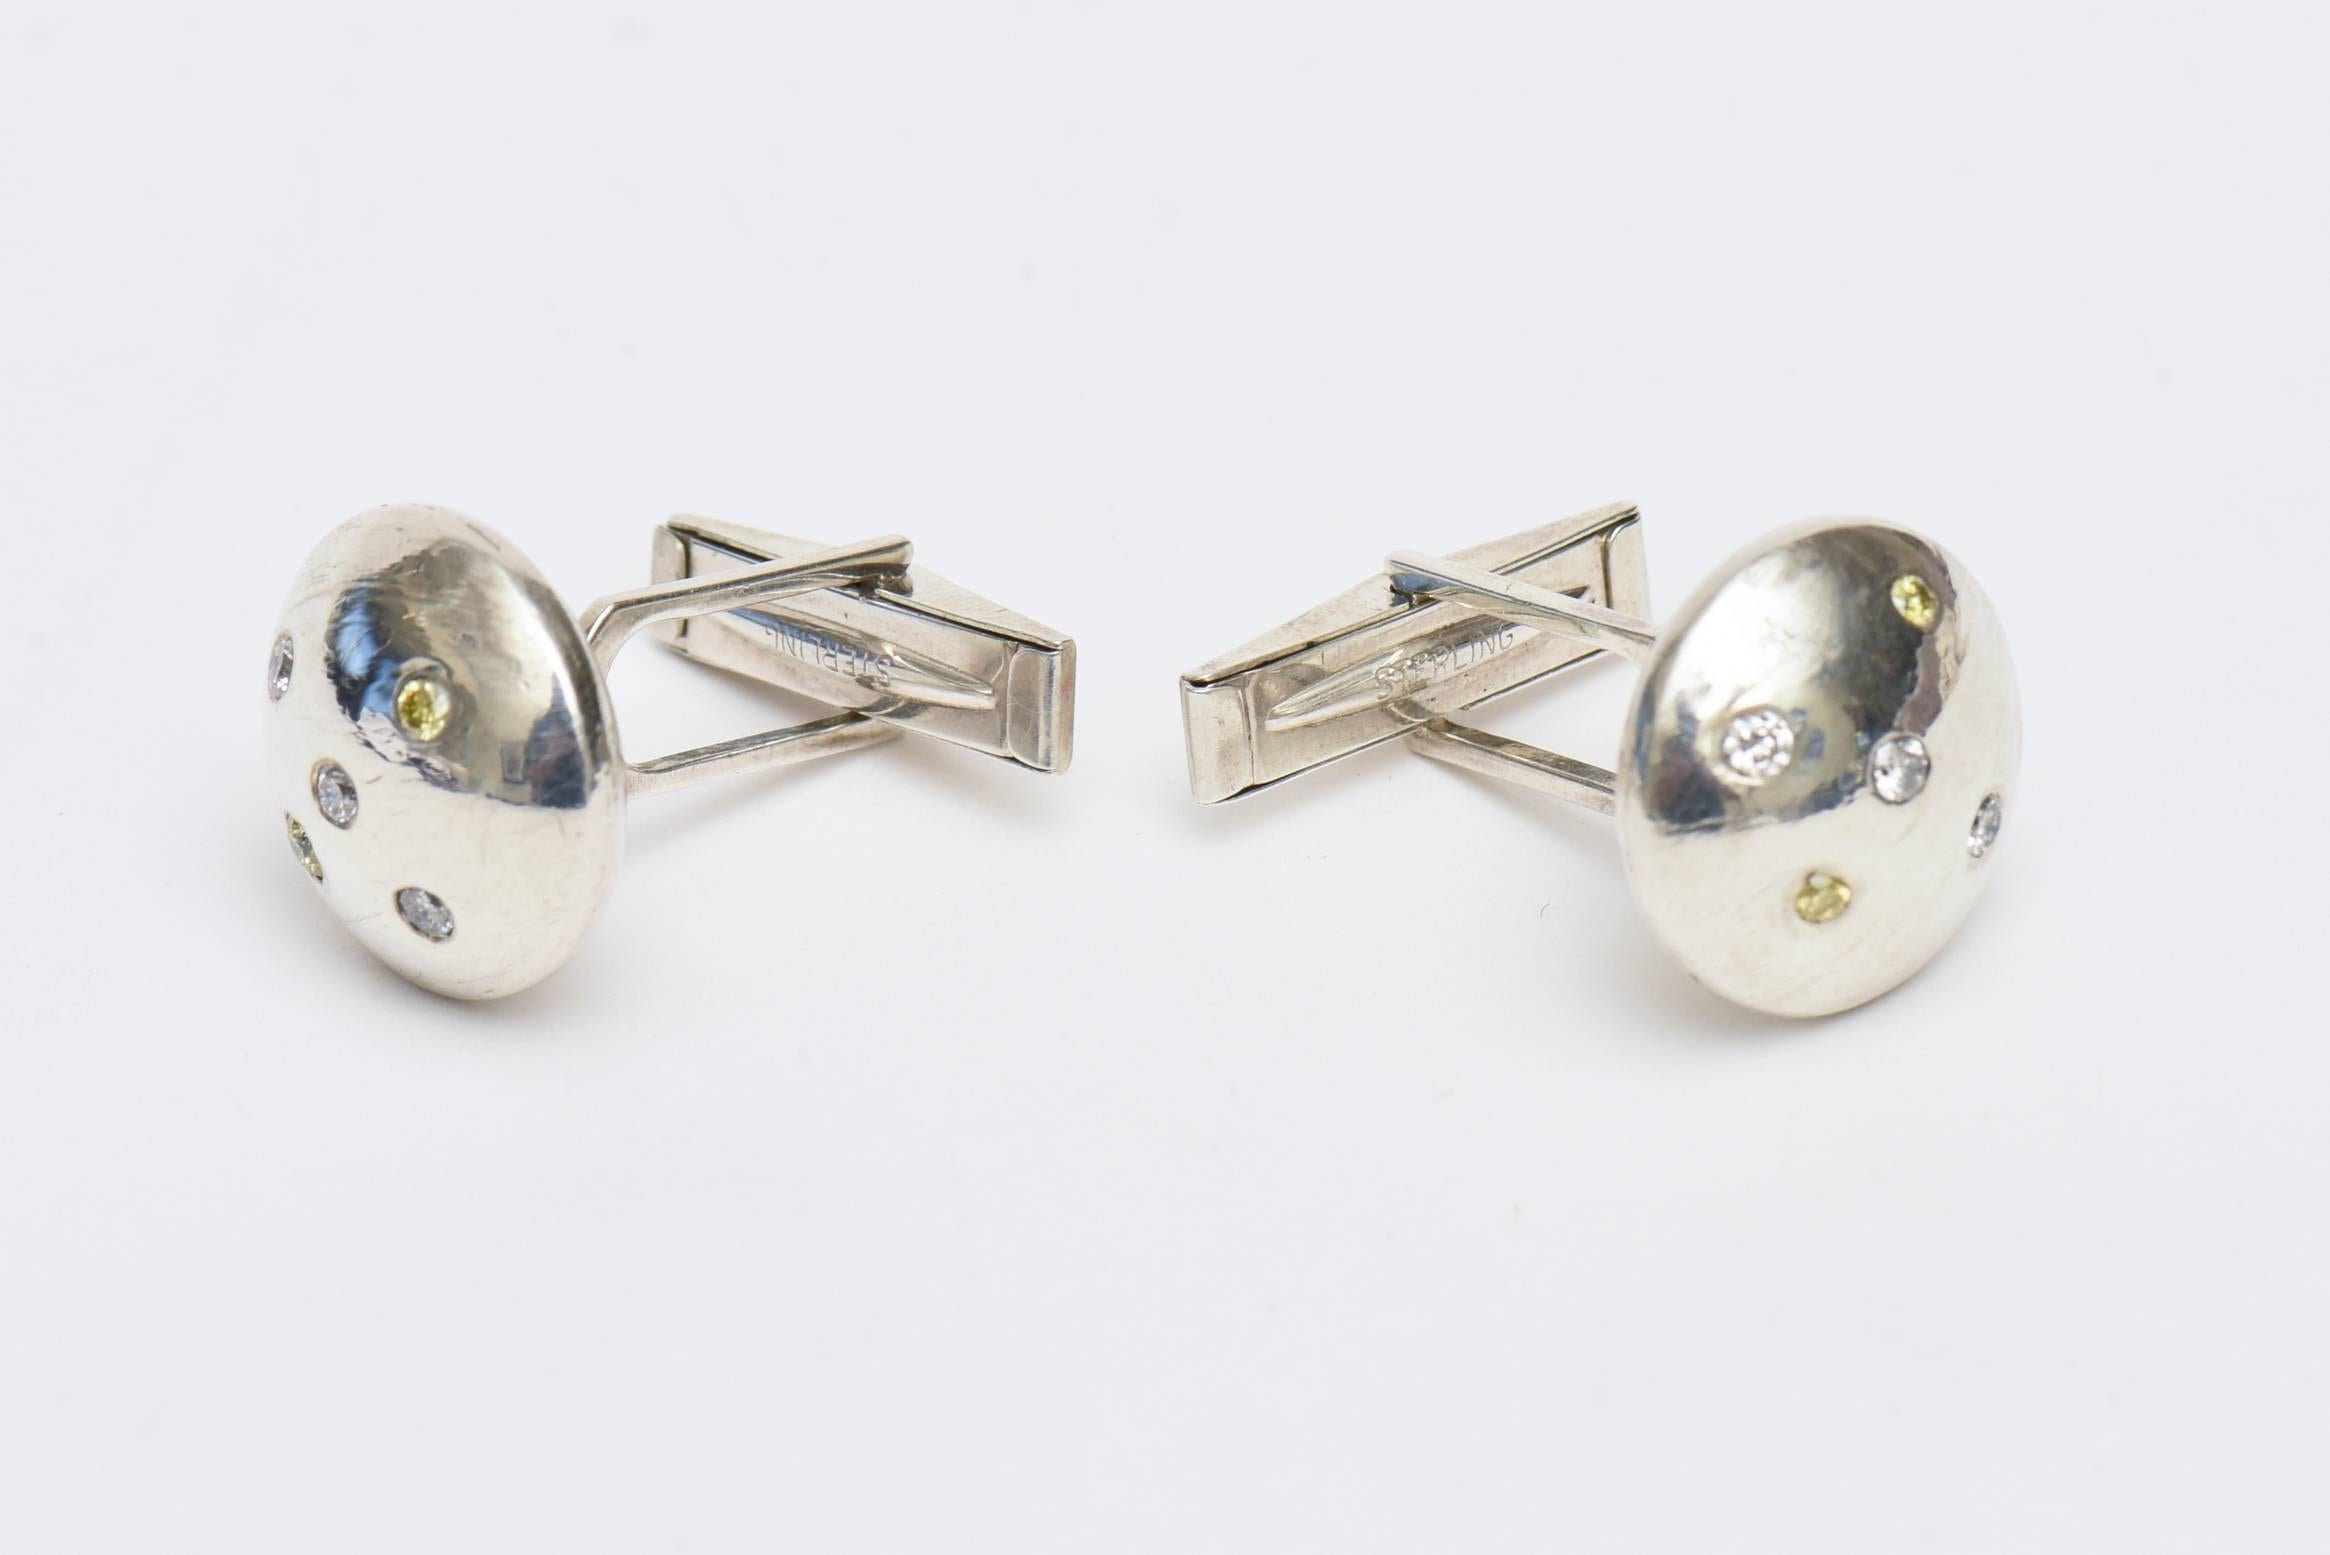 These beautiful and jeweler made sterling silver and tiny diamond cufflinks are unisex.. Their dome top has 4 small tiny diamonds in them. They are well made and have a great modern presence to them. These would make a great gift.

